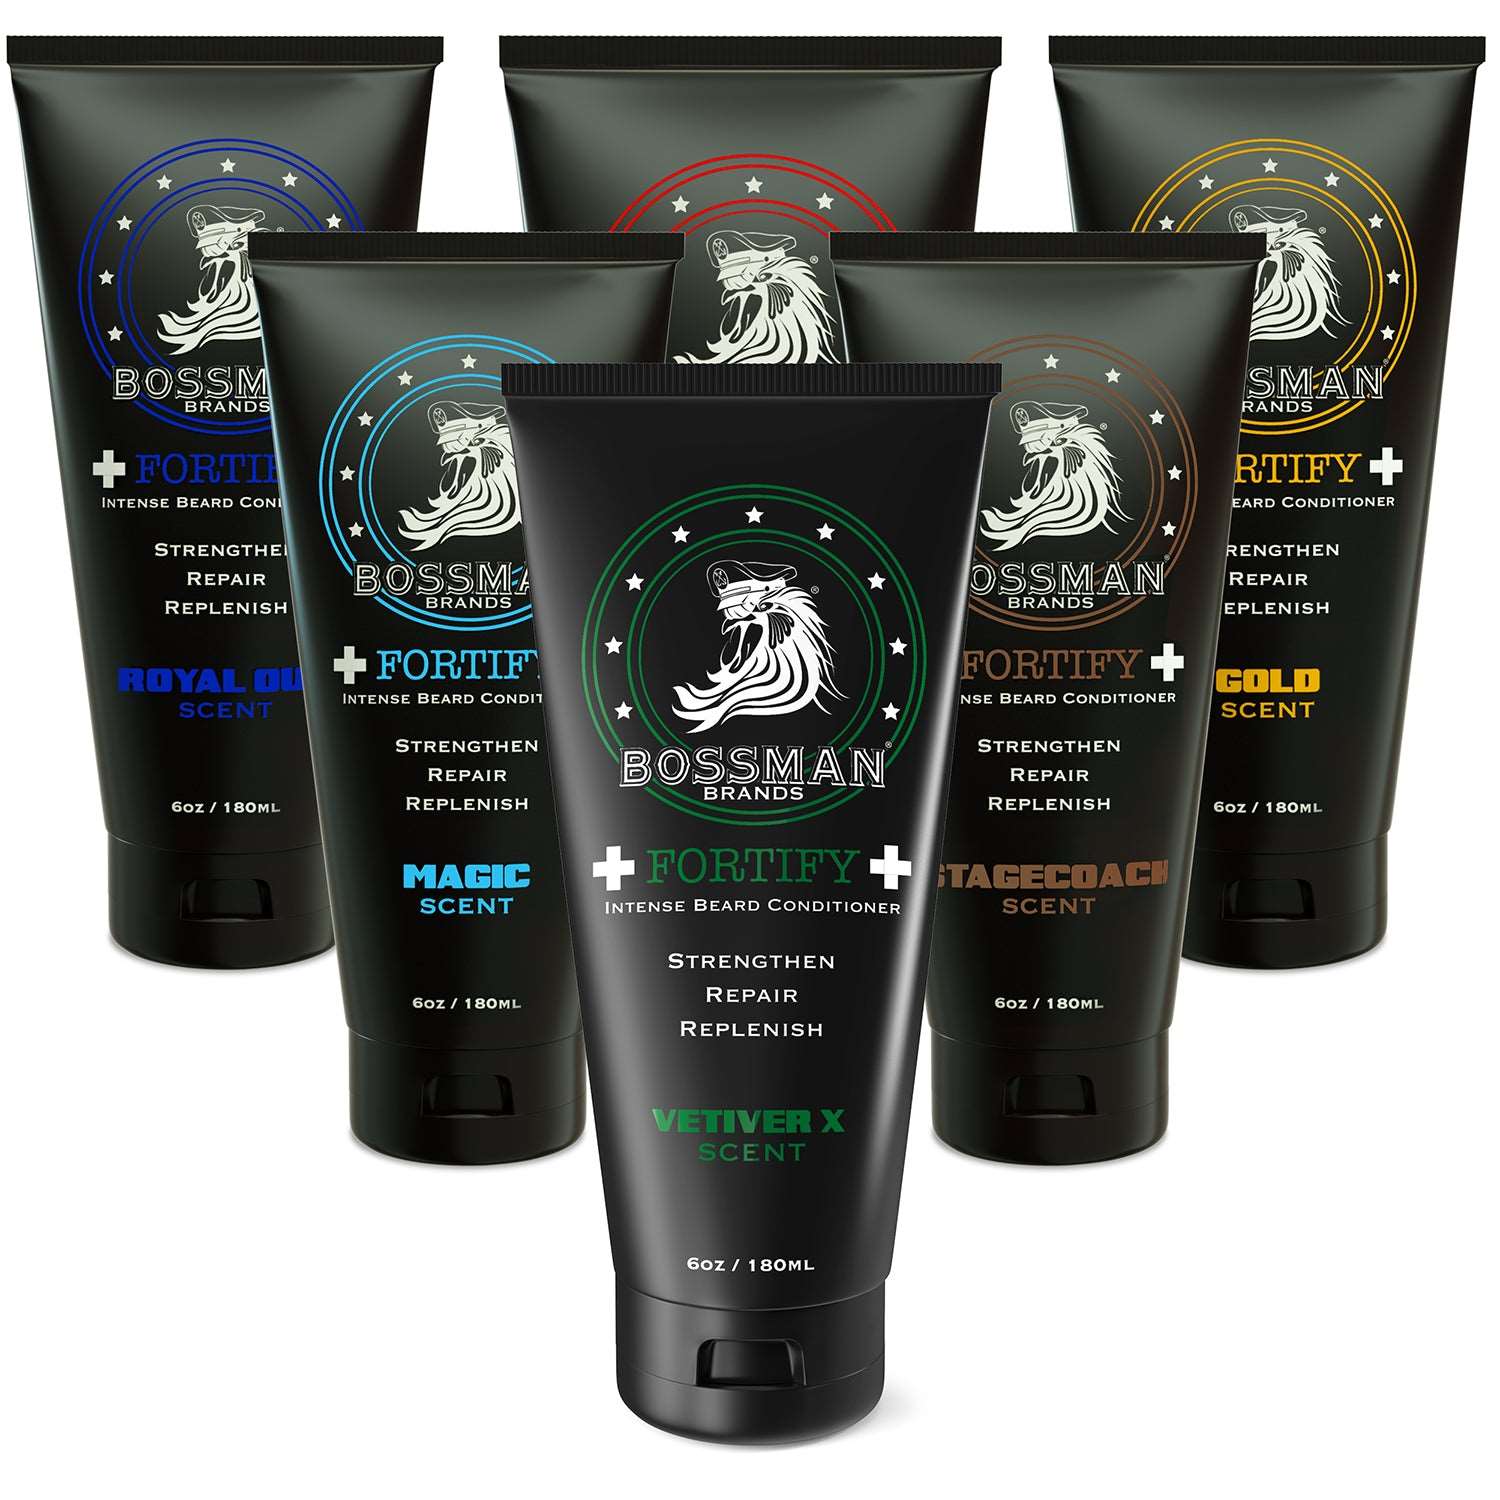 Fortify Intense Conditioner - 6 Pack (Stagecoach, Magic, Hammer, Gold, Royal Oud, Vetiver) Bossman Brands